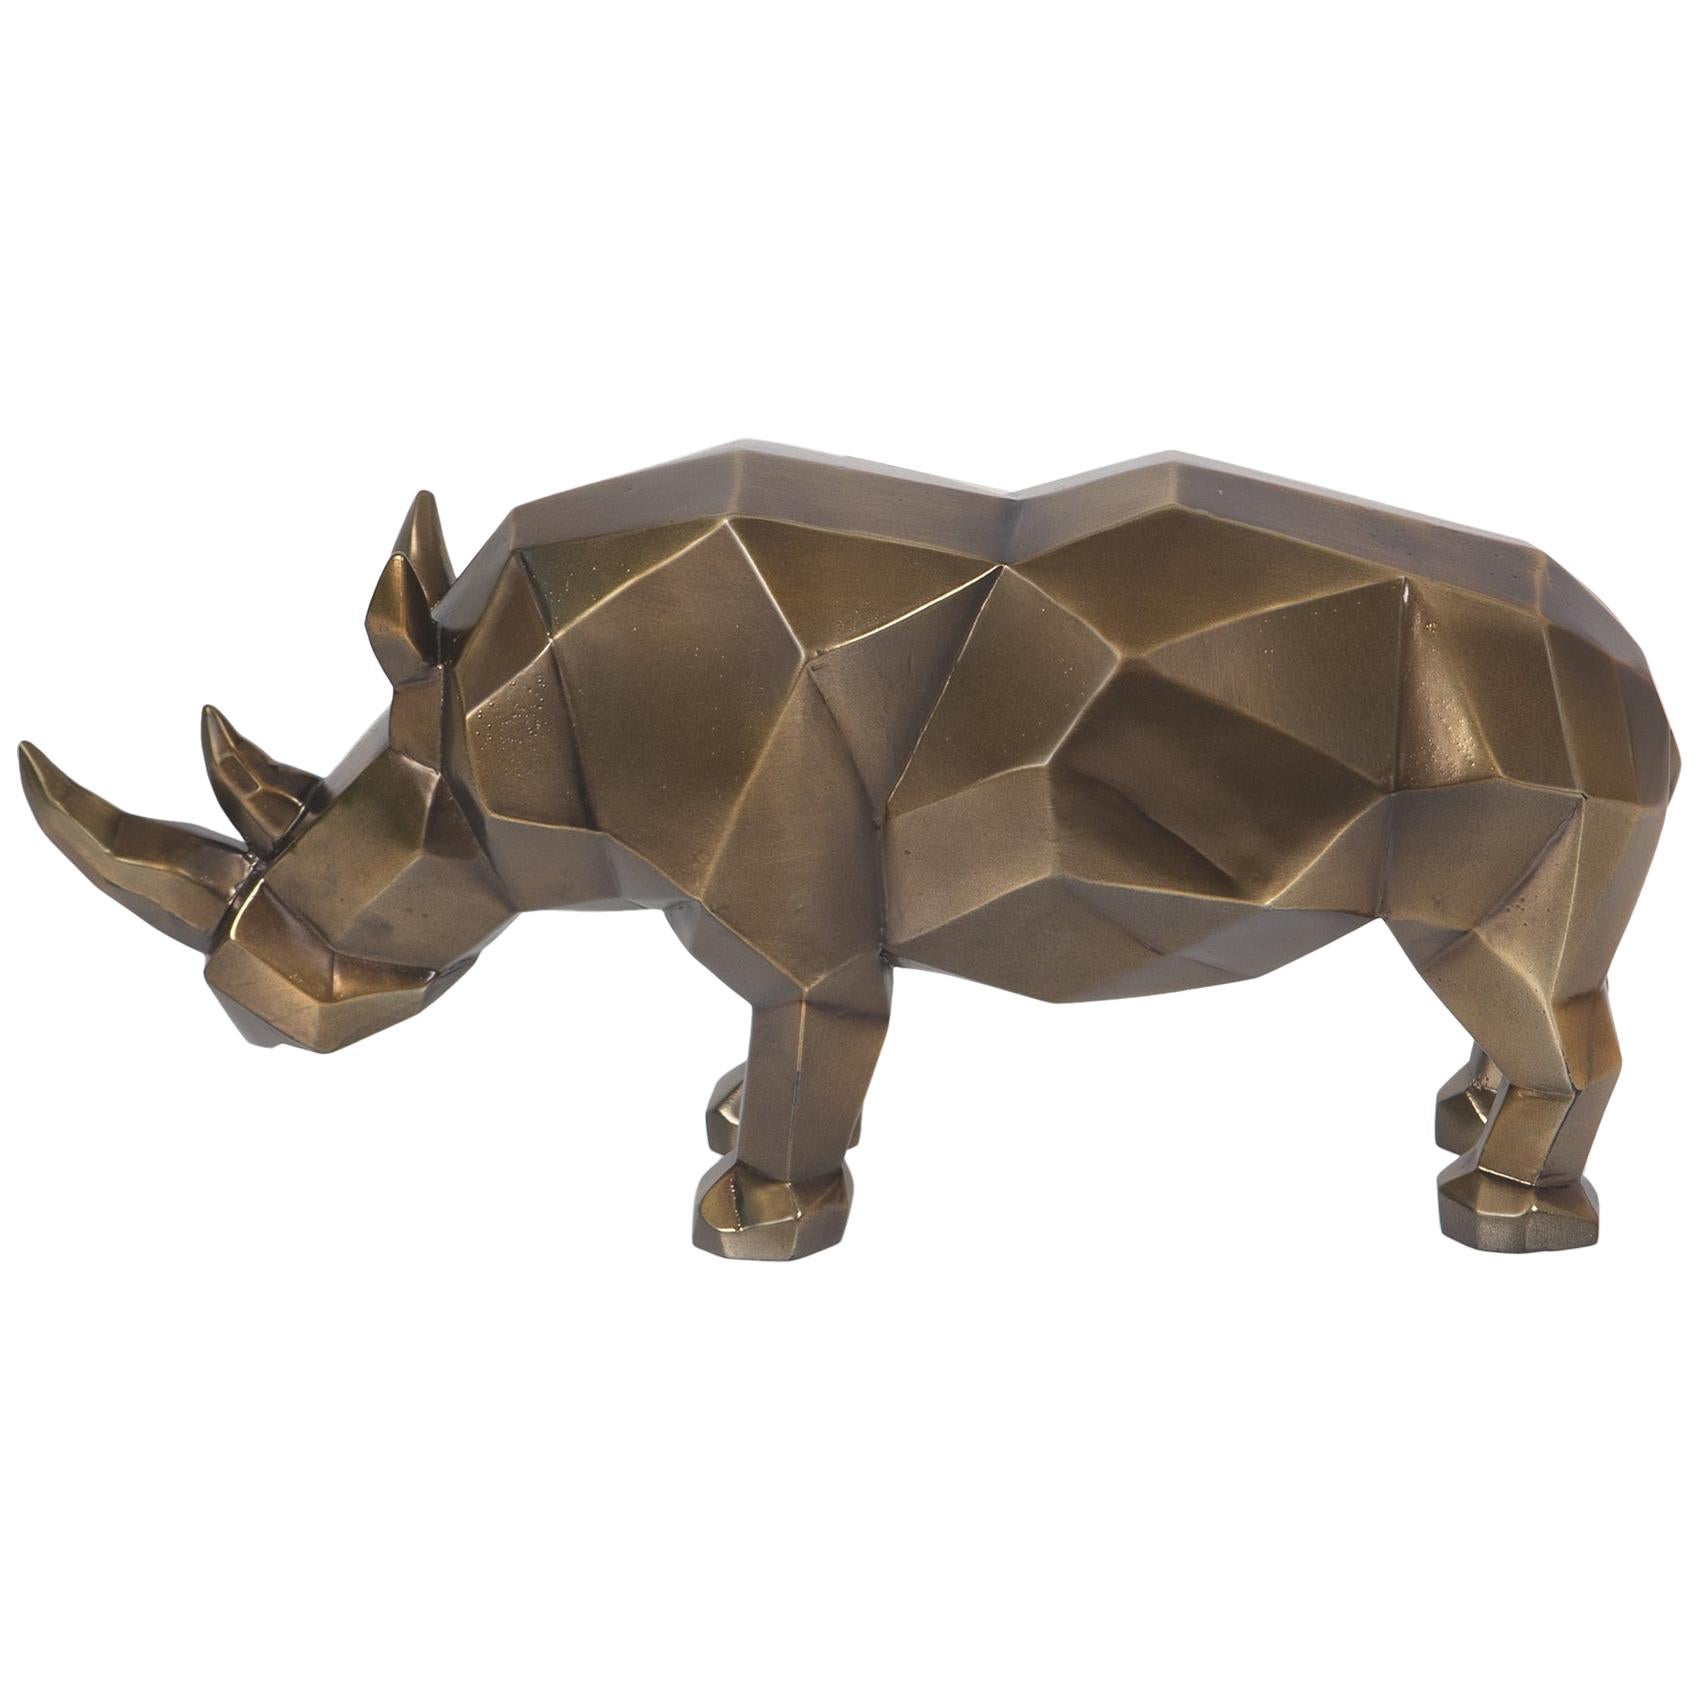 Rhino Resin Sculpture For Sale